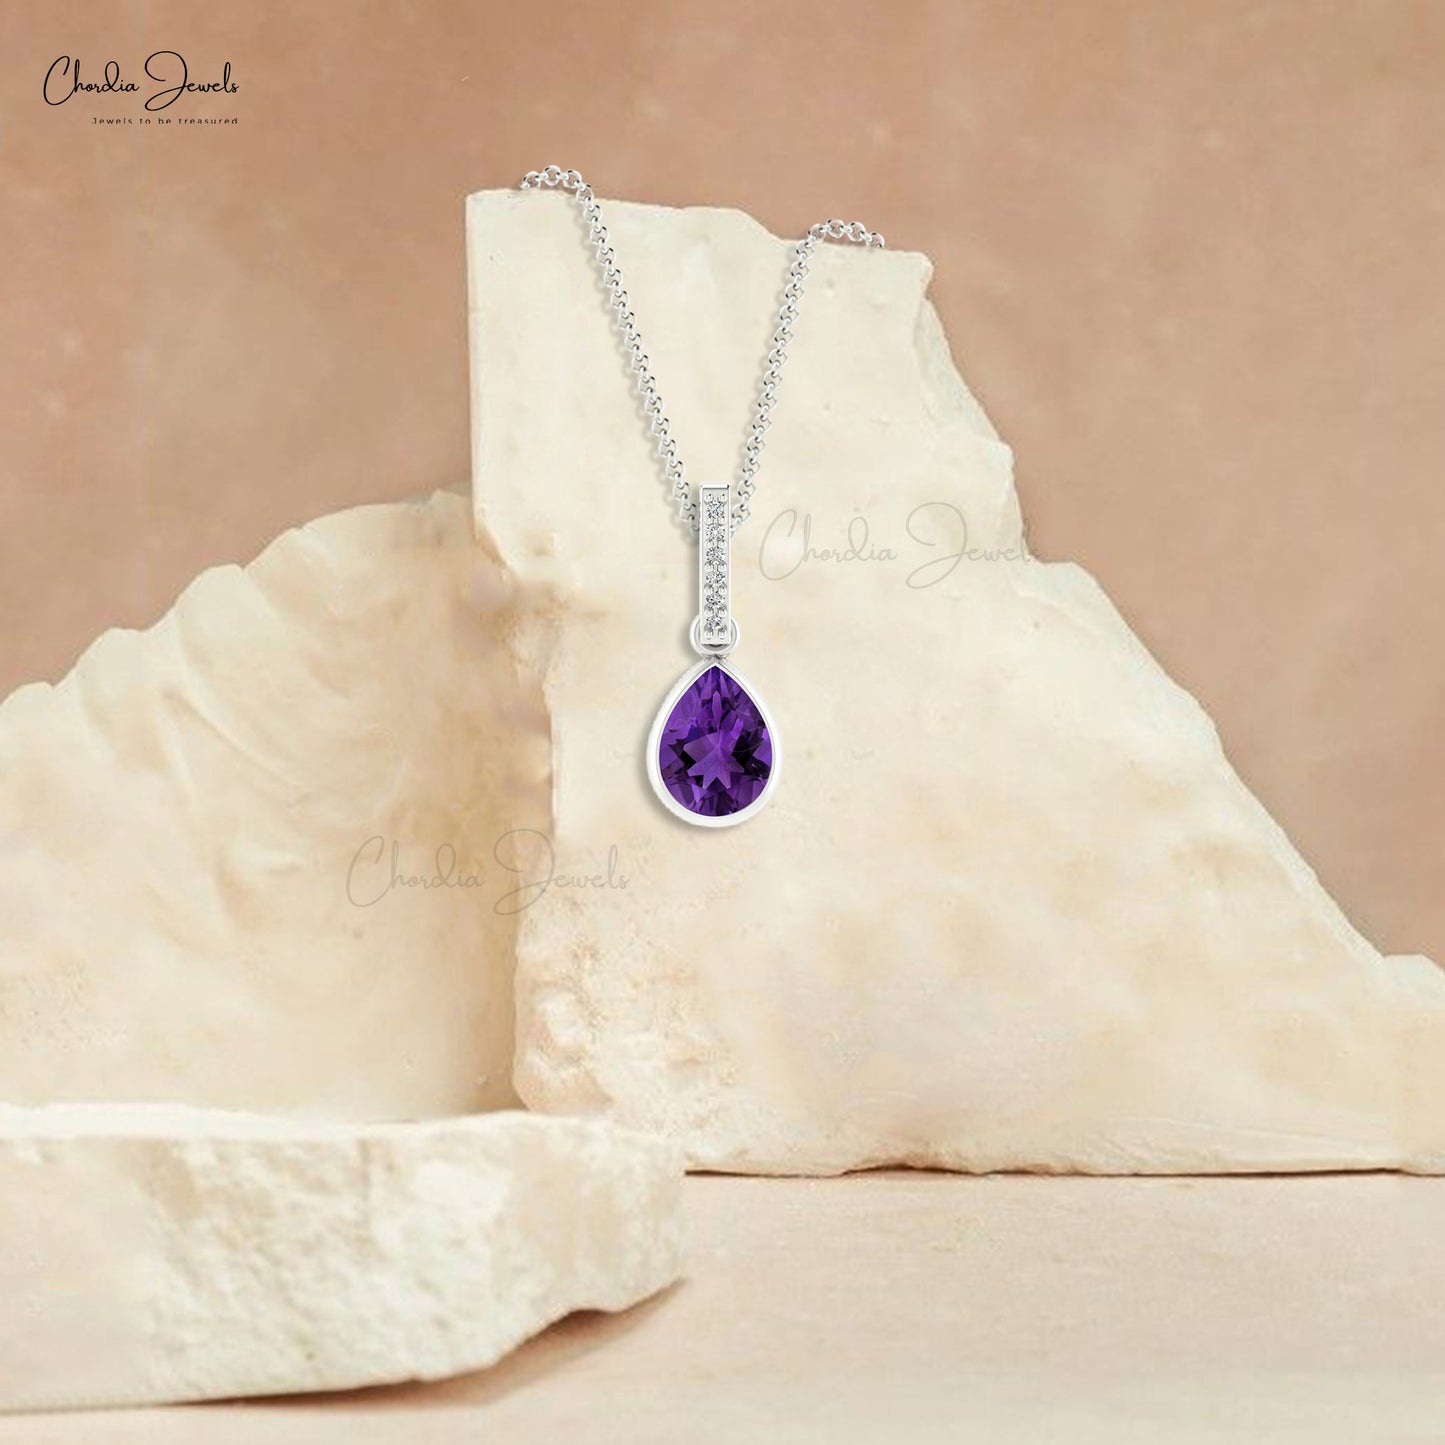 Load image into Gallery viewer, Natural Amethyst and Diamond Pendant, 14k Solid Gold Gemstone Pendant, 8x6mm Pear Shape Gemstone Pendant Gift for Wife
